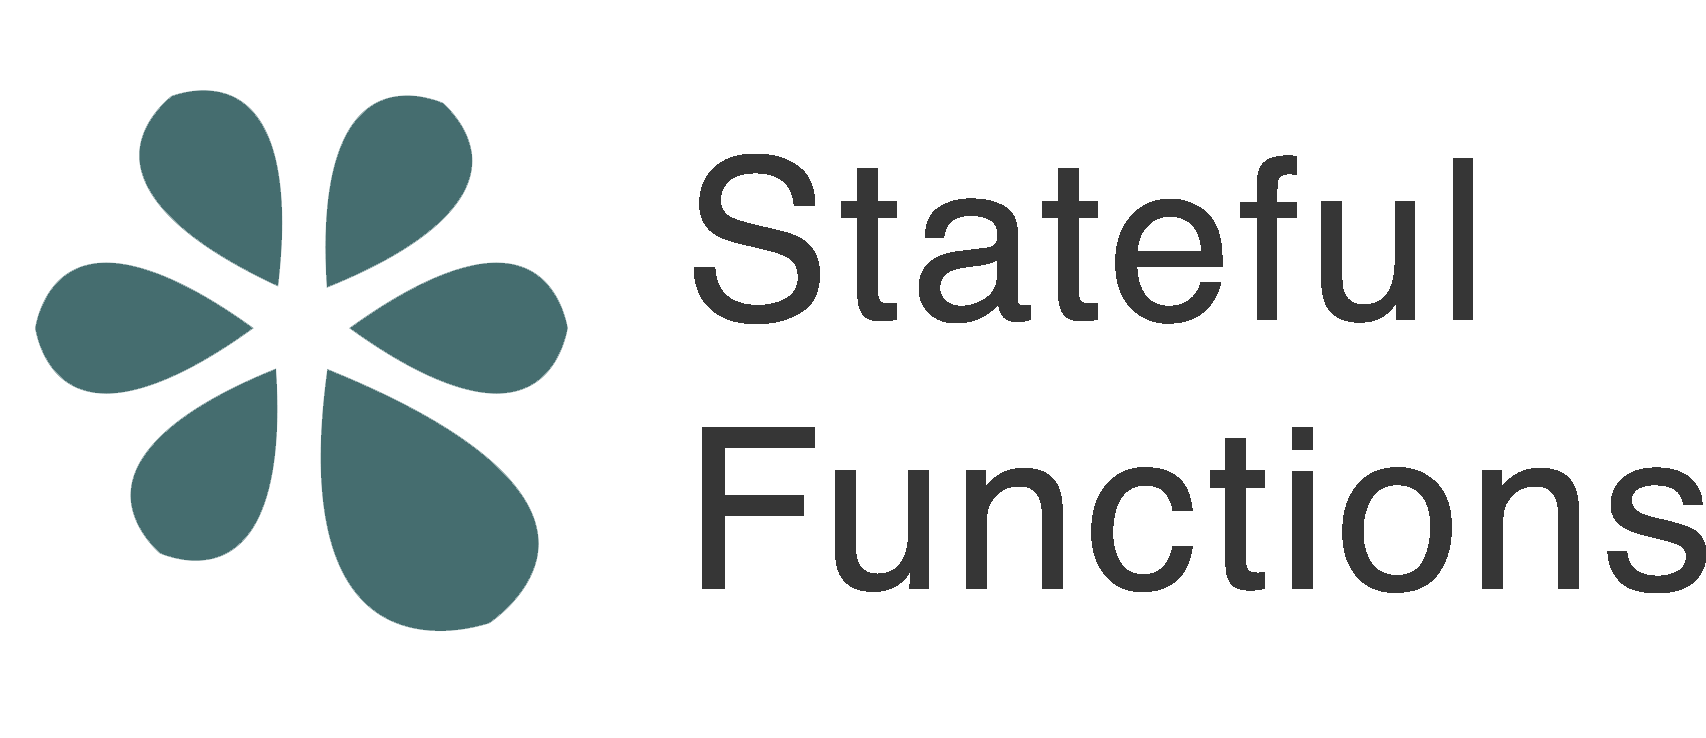 Stateful Functions